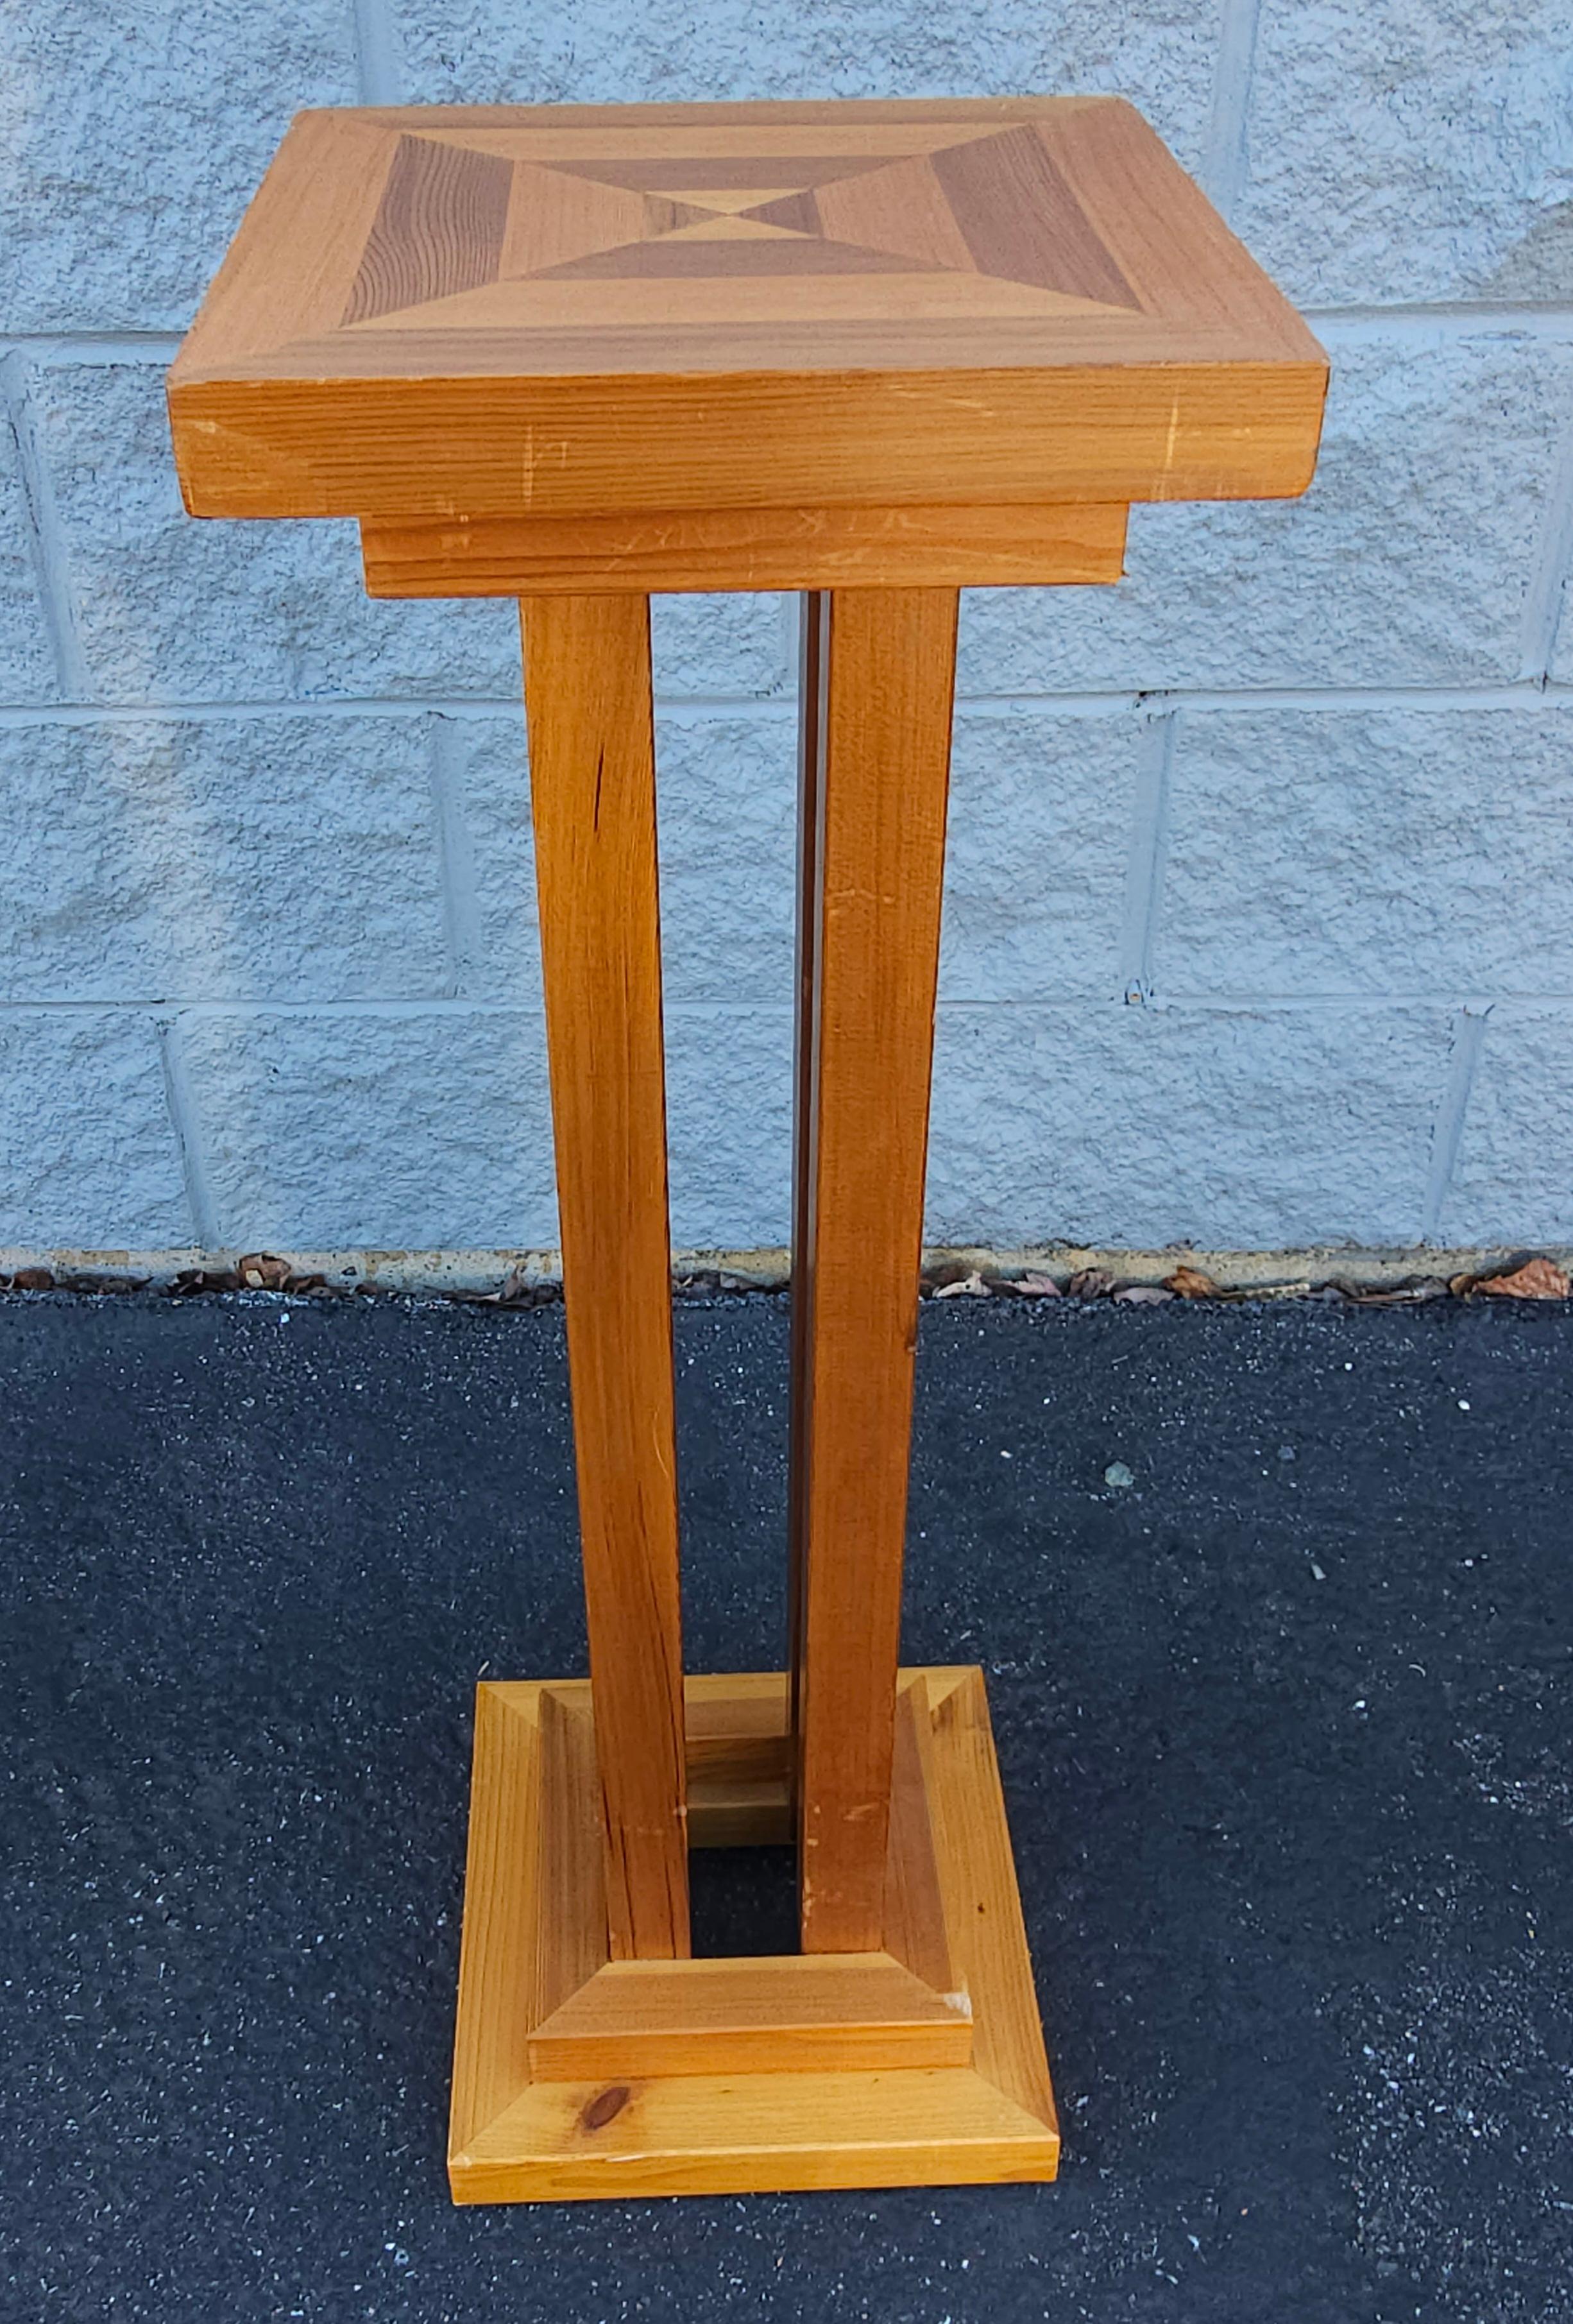 20th Century Mixed Fruitwood Parquetry Pedestal Plant Stand In Good Condition For Sale In Germantown, MD